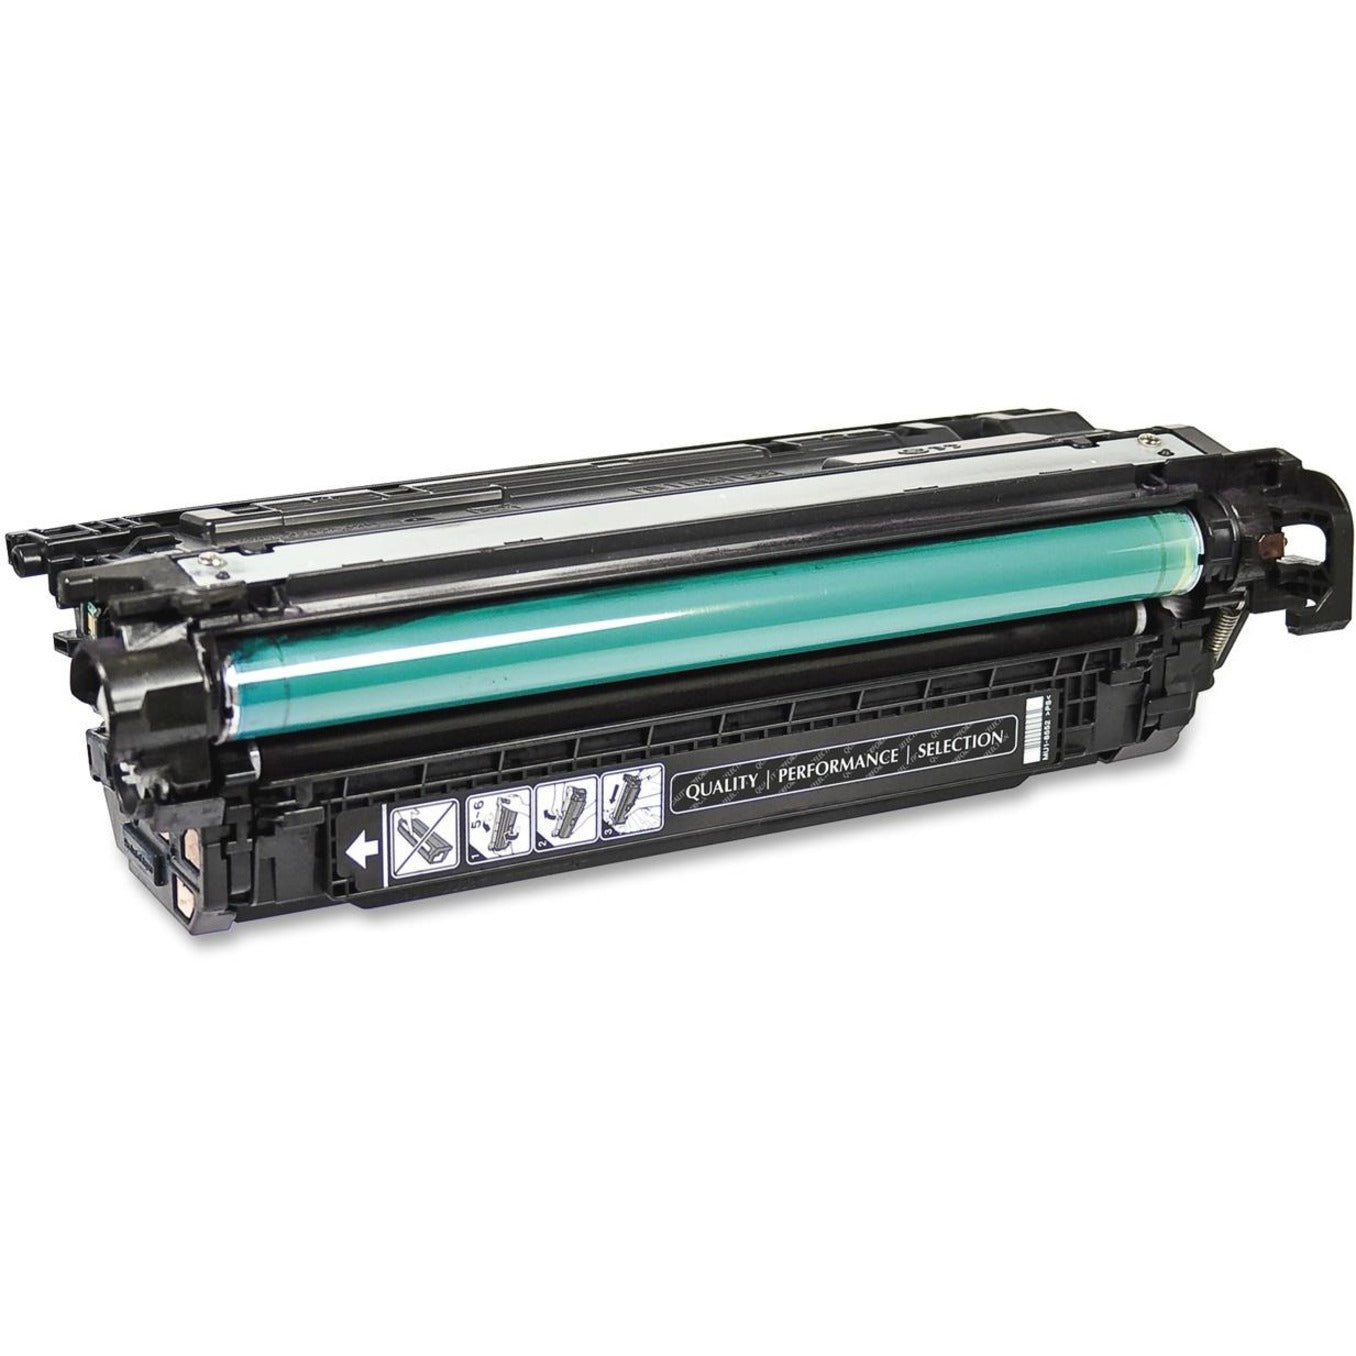 West Point 200489P Remanufactured HPCE260A Toner Cartridge, 8,500 Page Yield, Black